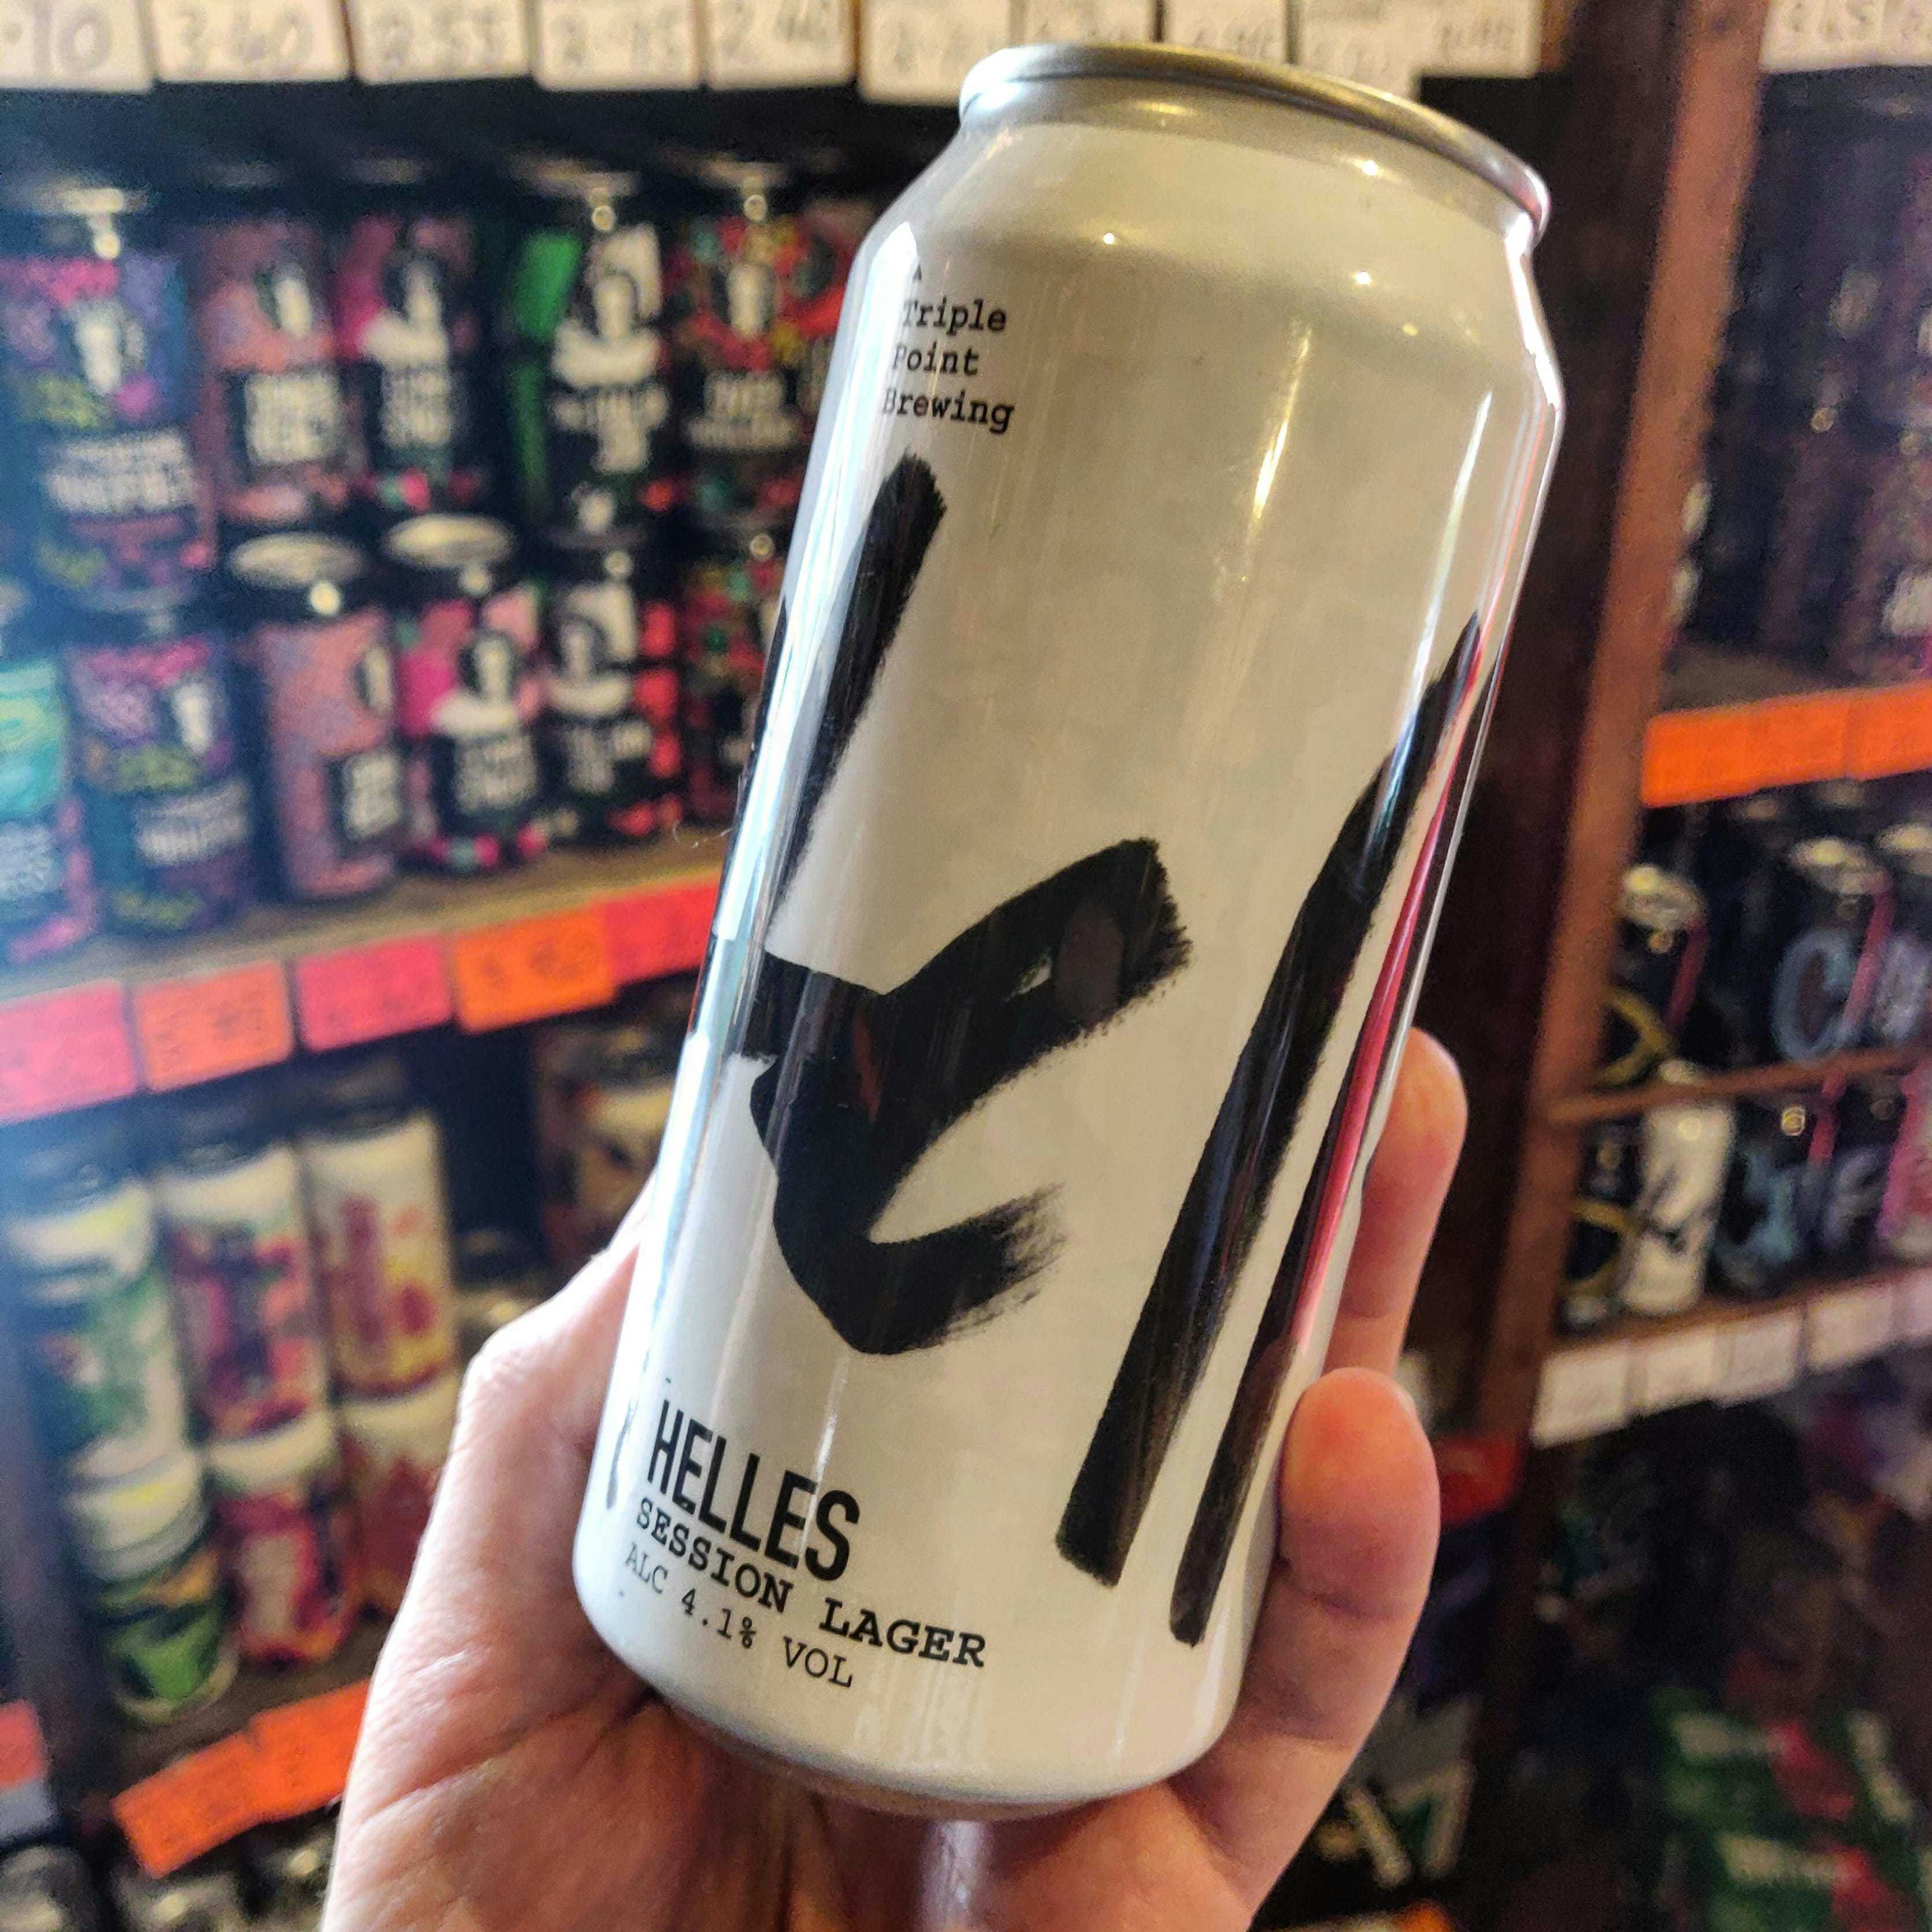 A can of Helles by Triple Point Brewing at The Dram Shop